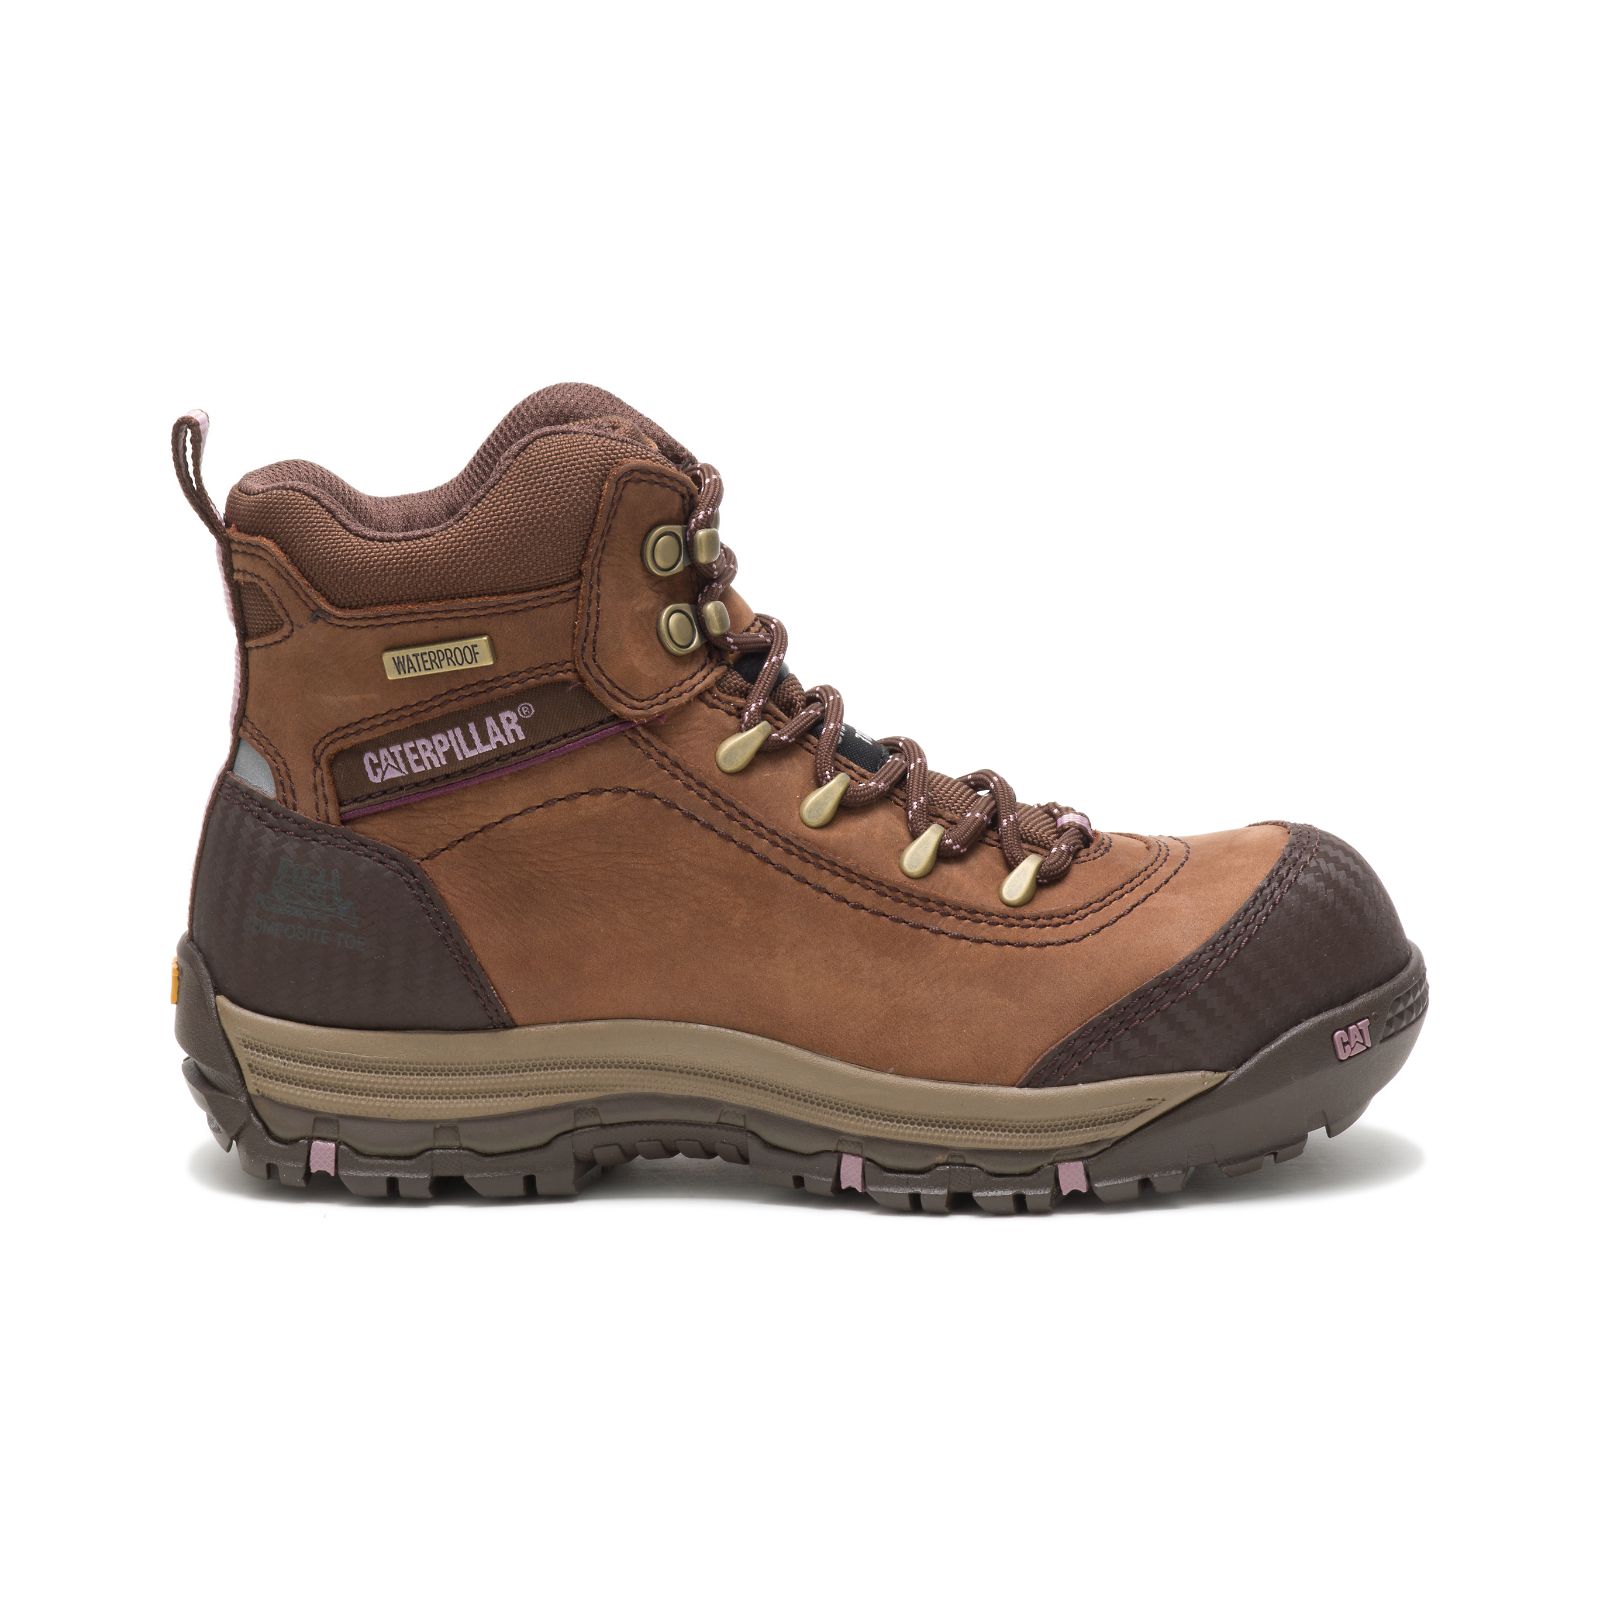 Caterpillar Ally Waterproof Composite Toe Philippines - Womens Work Boots - Brown 54062UQTJ